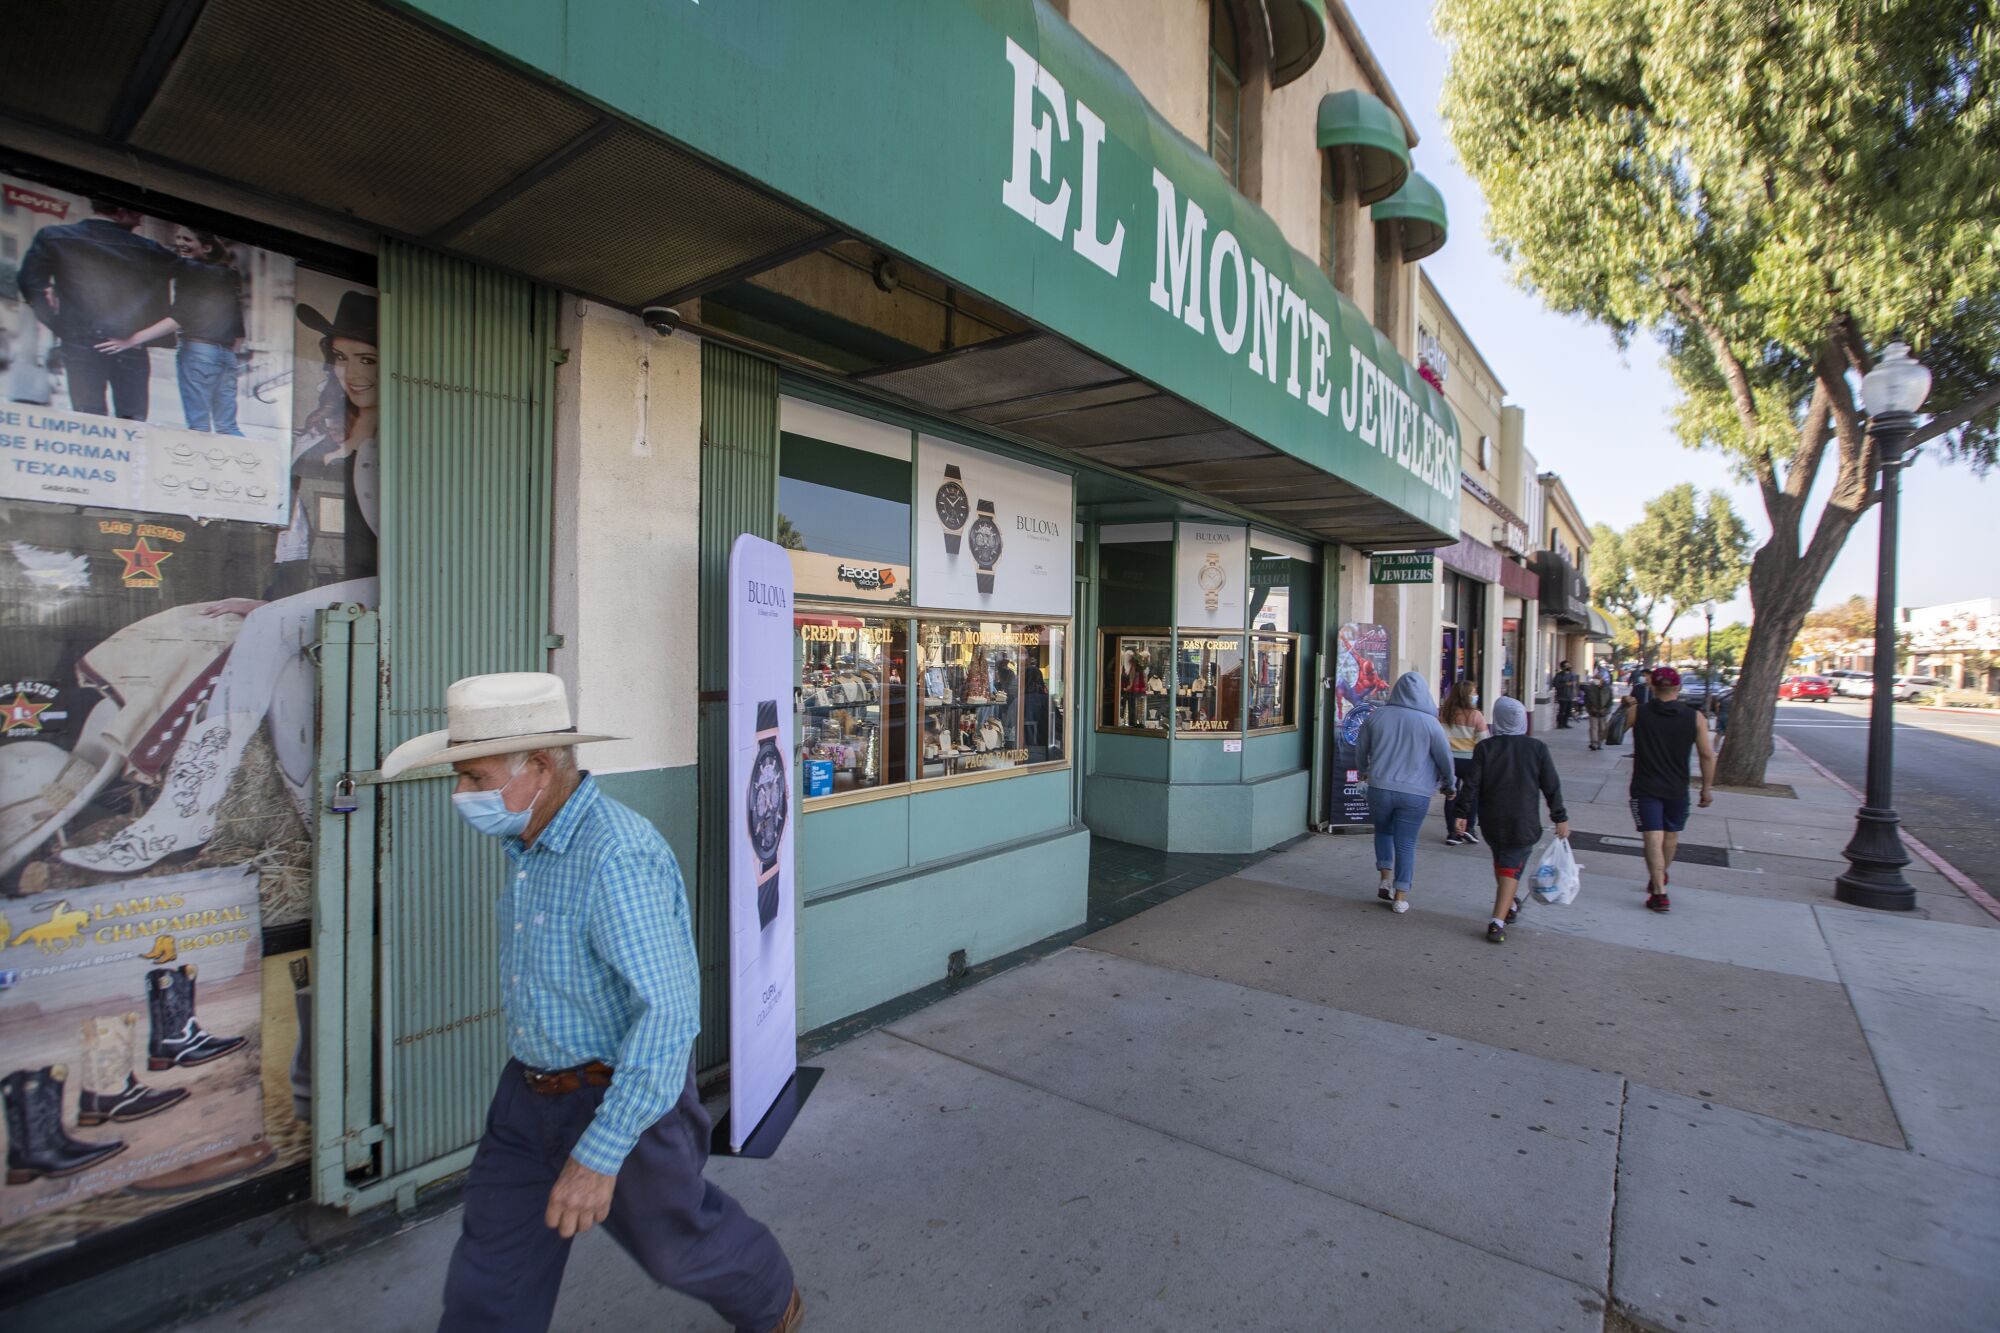 Pedestrians walk along Main Street in El Monte, where many businesses are struggling to stay open.